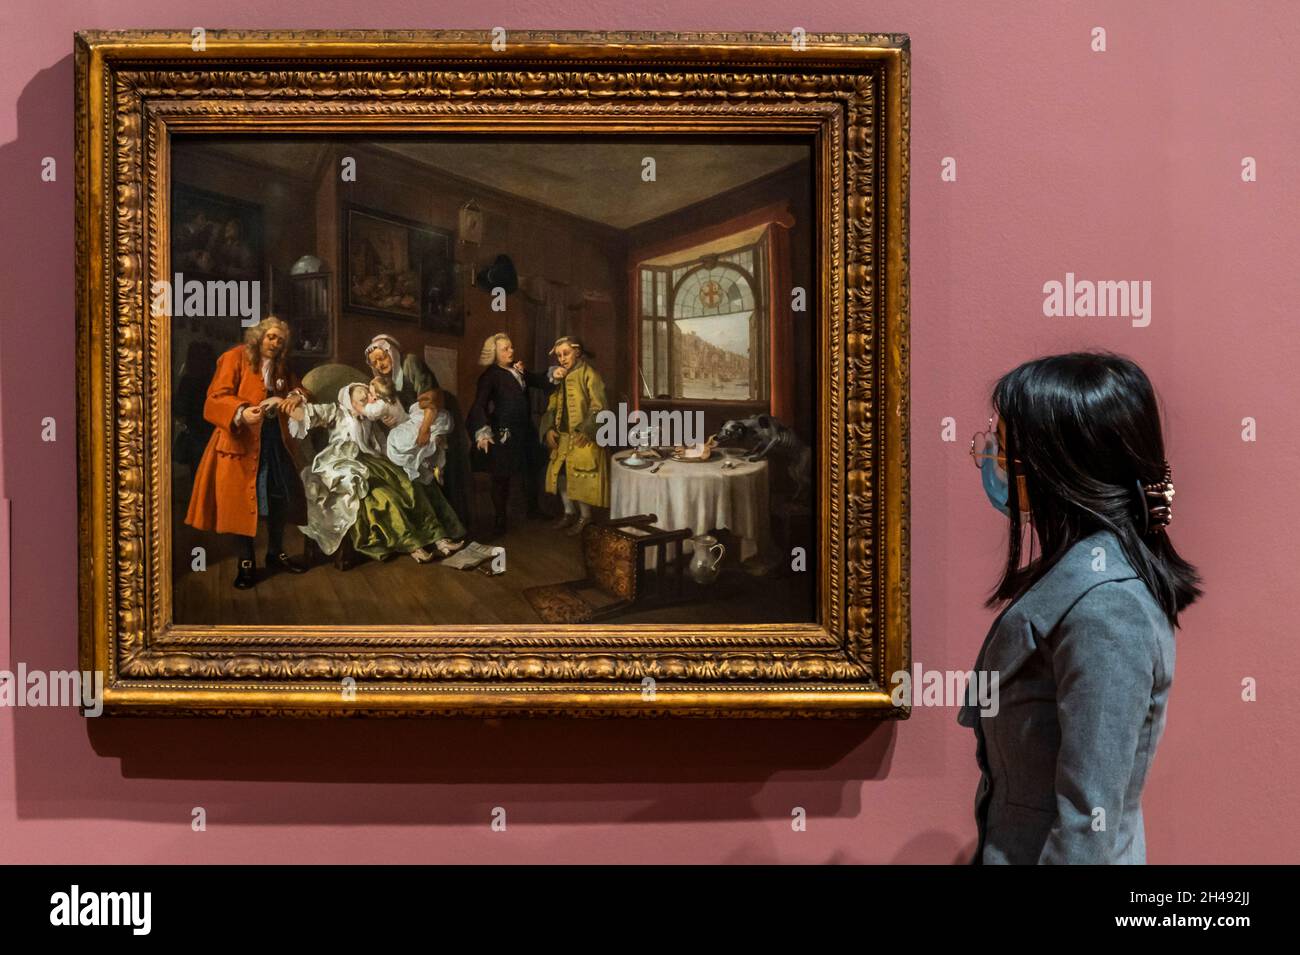 London, UK. 1st Nov, 2021. Marriage A-la-Mode, 1743 a sequence of paintings - Hogarth & Europe at Tate Britain. A new exhibition presents William Hogarth (1697-1764), one of Britain's most famous painters, in a new light. His work is shown alongside artists from across the continent, comparing how Hogarth depicted London with how other artists captured European cities. Credit: Guy Bell/Alamy Live News Stock Photo